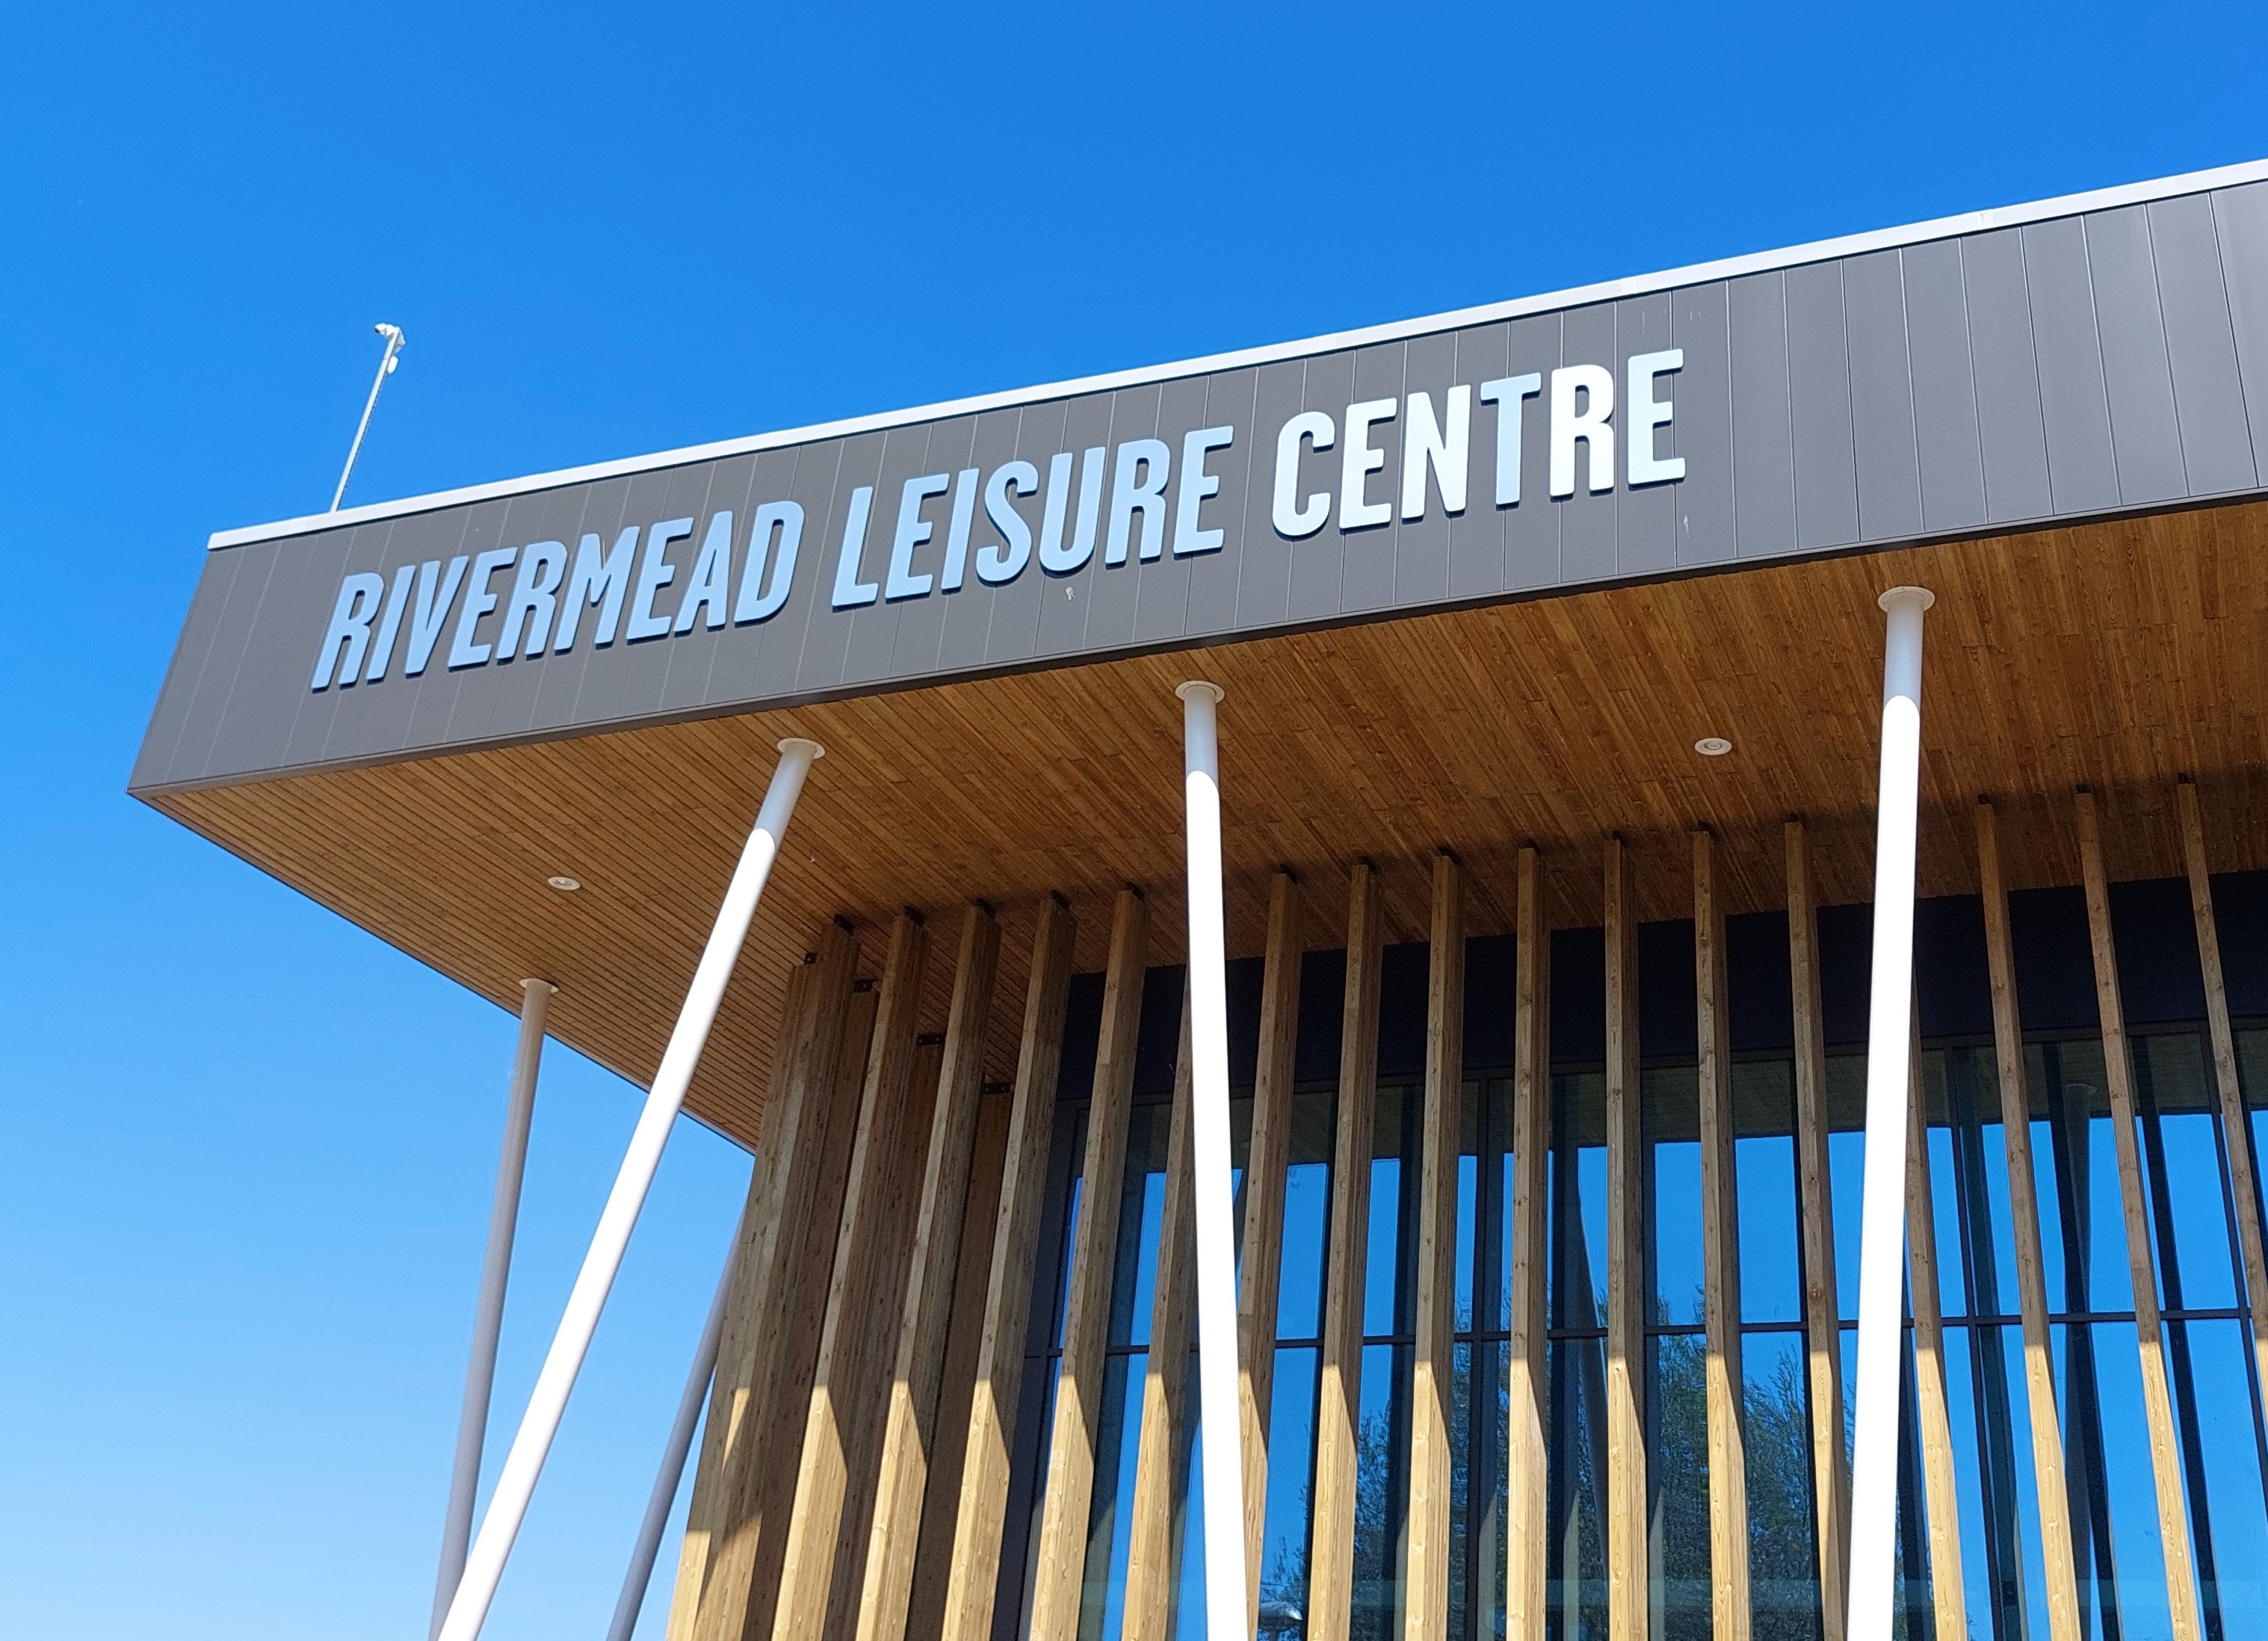 The new Rivermead Leisure Centre